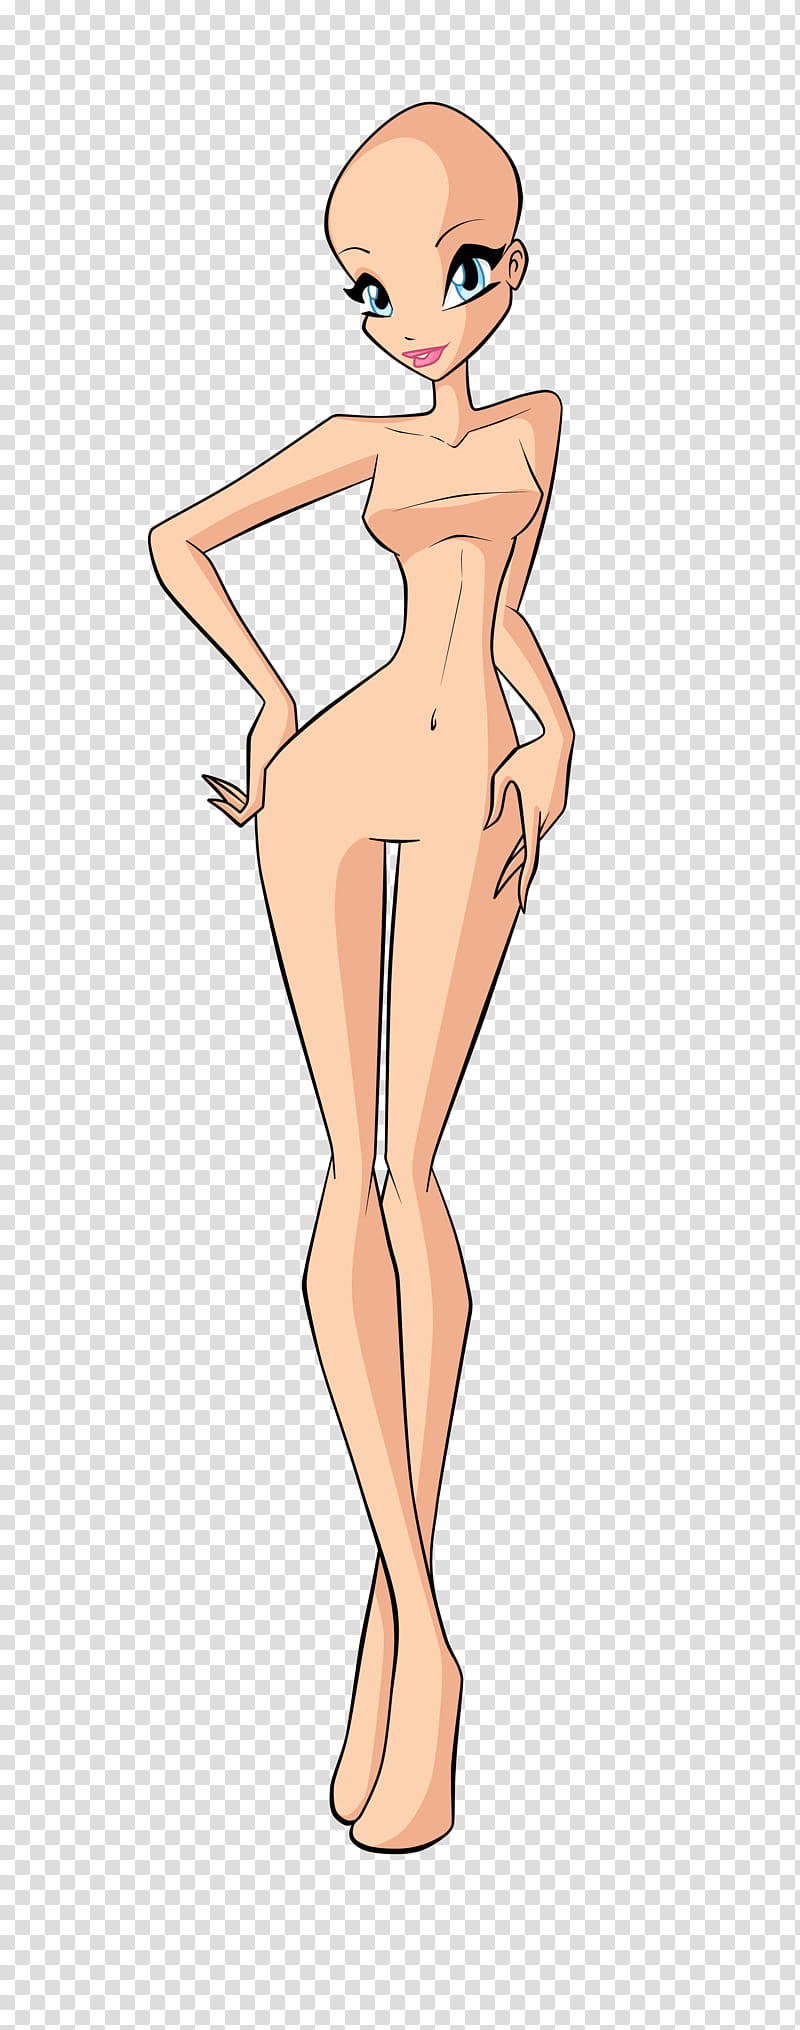 Do you like it Free base , cartoon character illustration transparent background PNG clipart